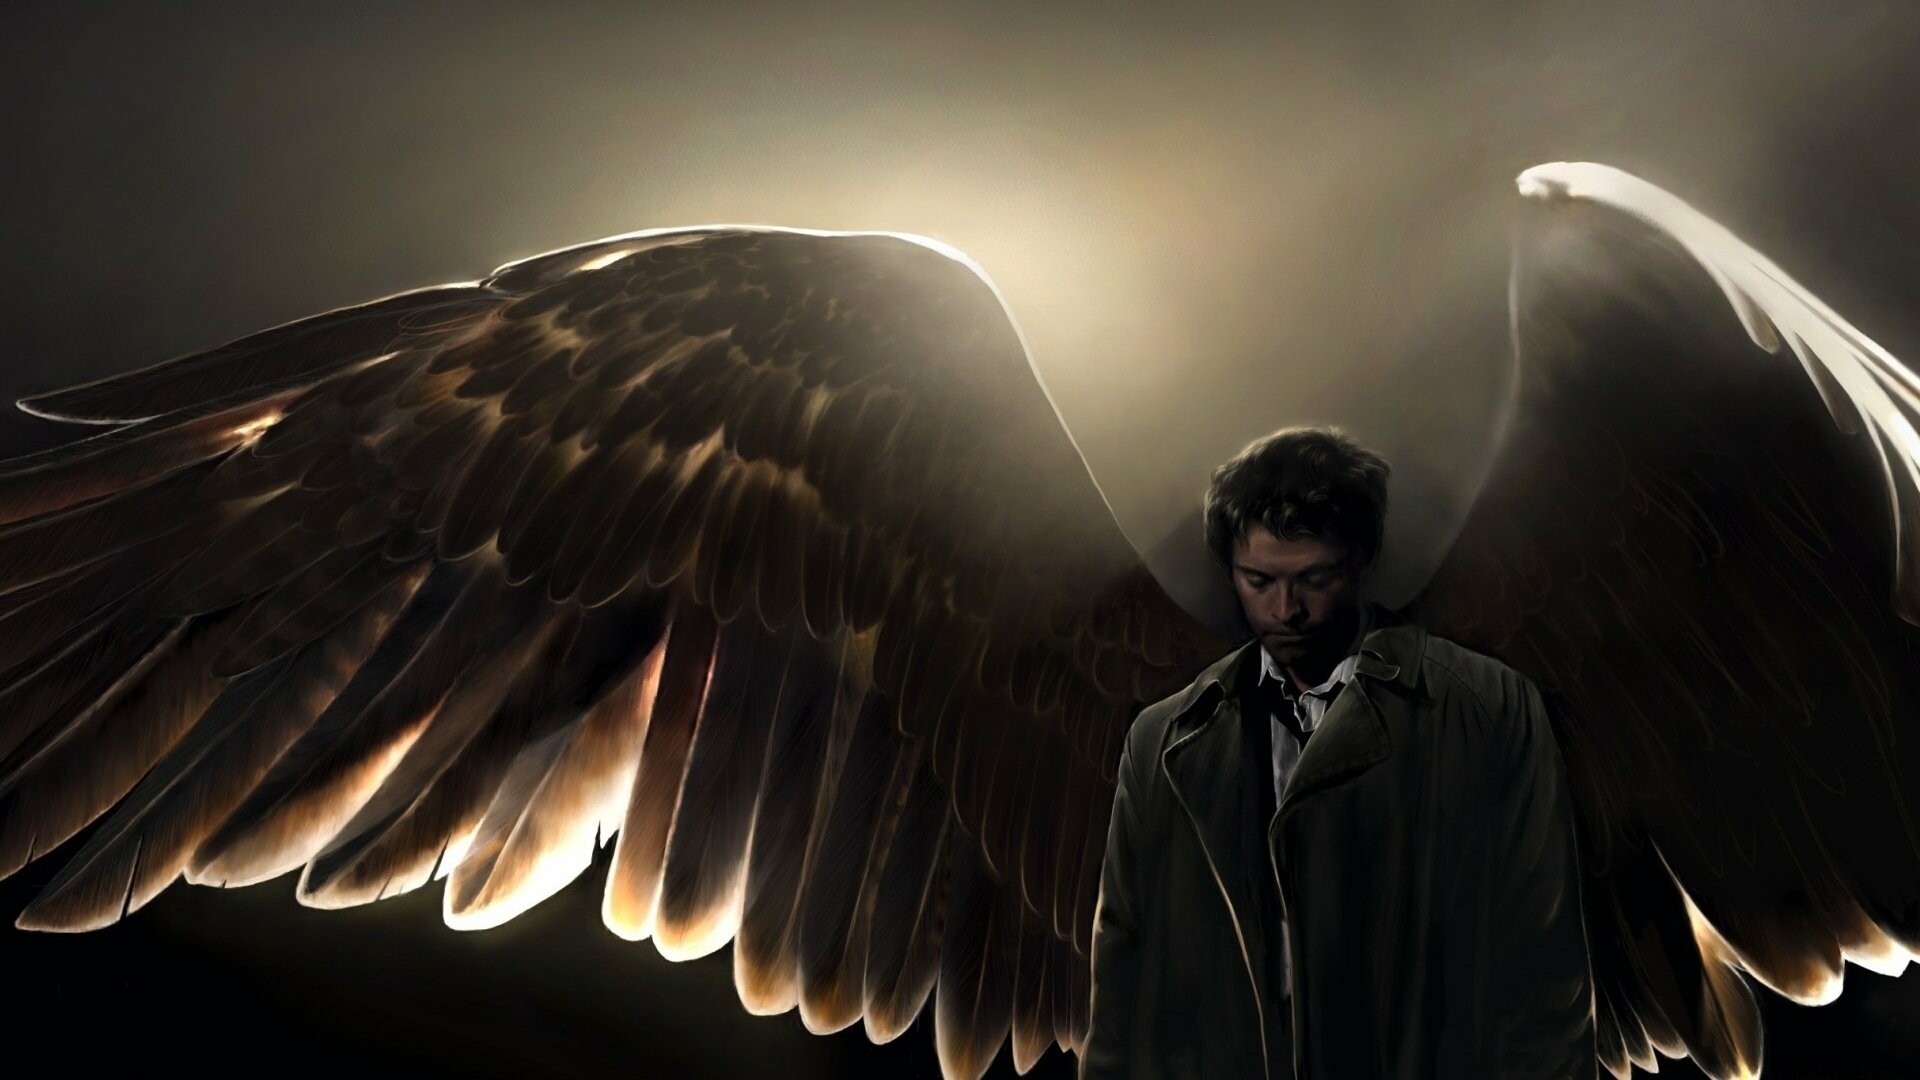 Supernatural: Castiel, who first appears in the fourth season and is used to introduce the theme of Christian theology to the series. 1920x1080 Full HD Background.